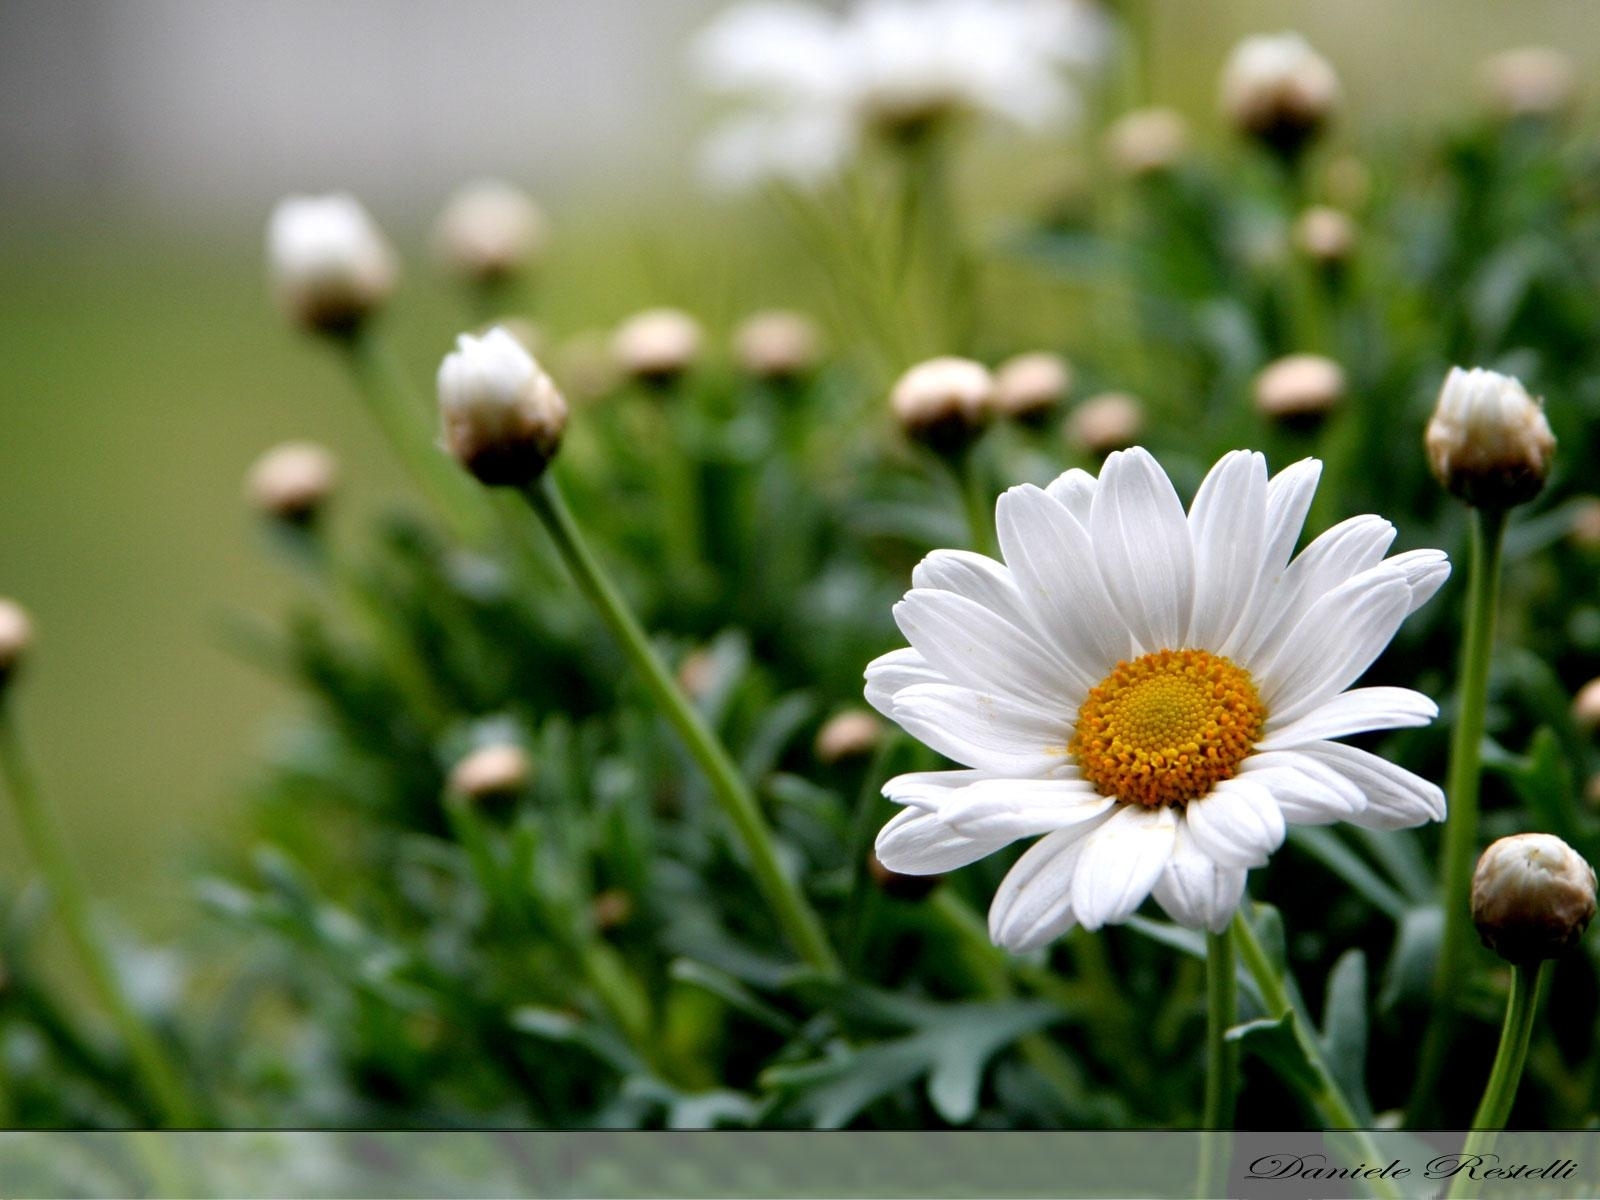 plants, flowers, camomile, green